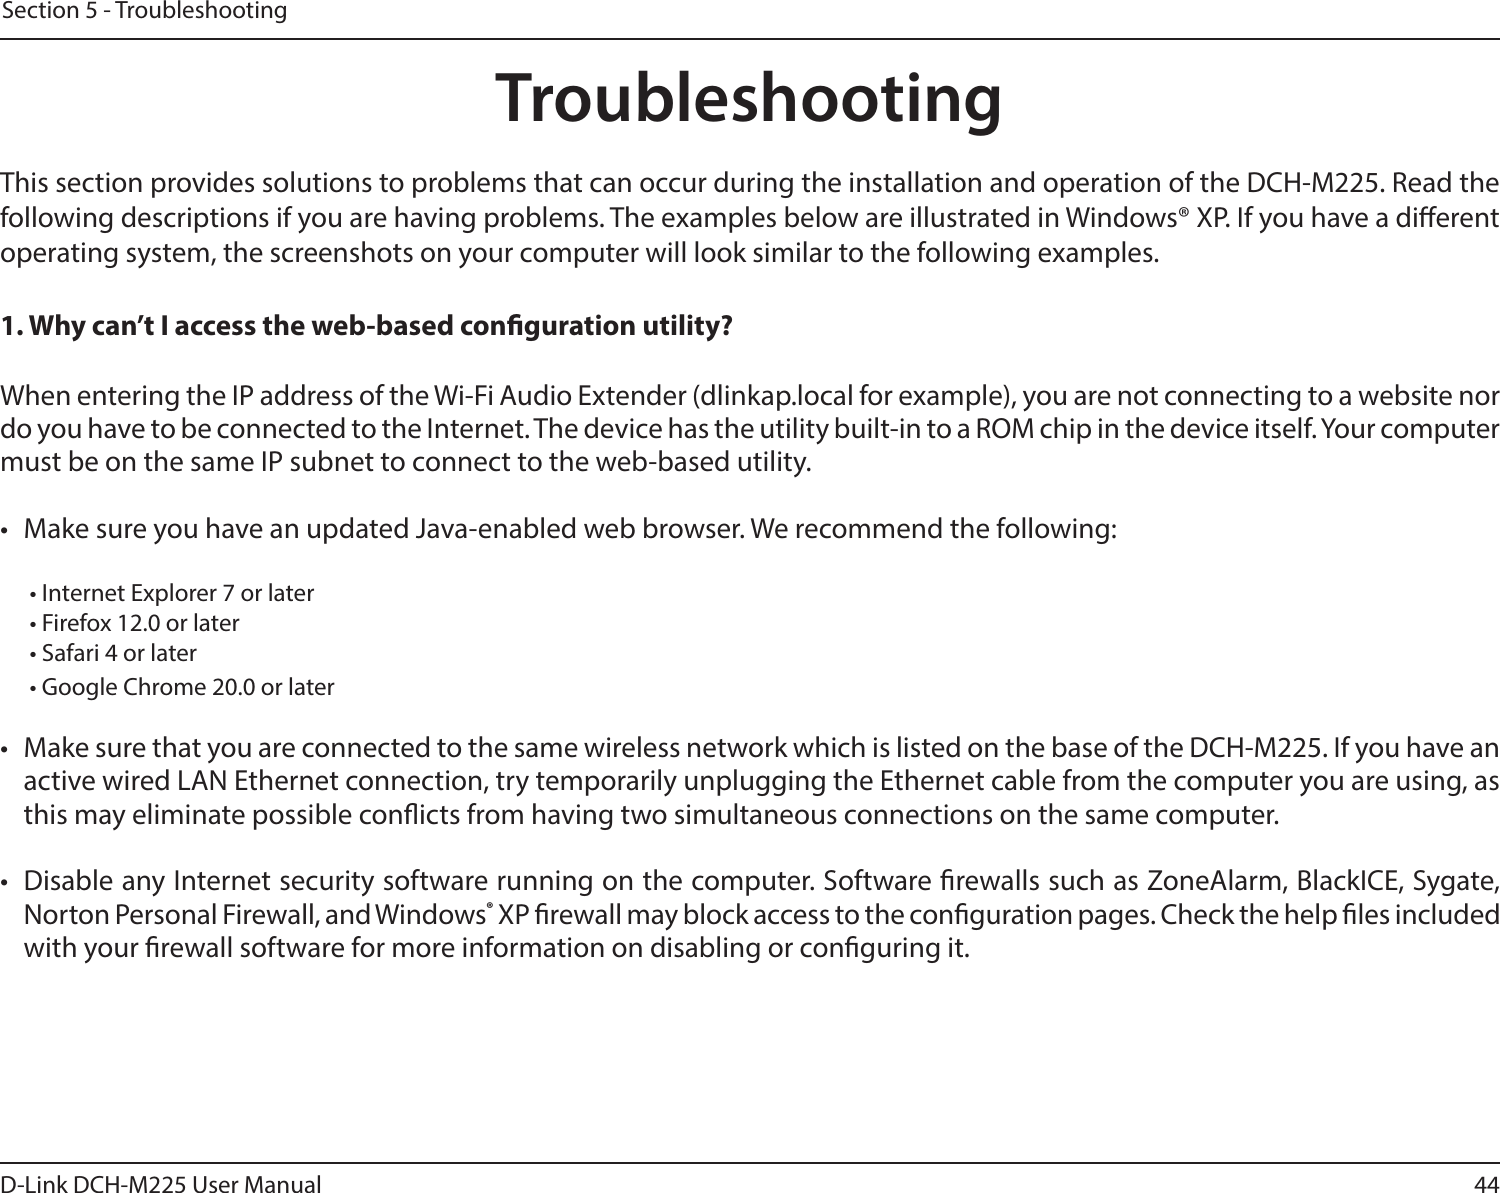 44D-Link DCH-M225 User ManualSection 5 - TroubleshootingTroubleshootingThis section provides solutions to problems that can occur during the installation and operation of the DCH-M225. Read the following descriptions if you are having problems. The examples below are illustrated in Windows® XP. If you have a dierent operating system, the screenshots on your computer will look similar to the following examples.1. Why can’t I access the web-based conguration utility?When entering the IP address of the Wi-Fi Audio Extender (dlinkap.local for example), you are not connecting to a website nor do you have to be connected to the Internet. The device has the utility built-in to a ROM chip in the device itself. Your computer must be on the same IP subnet to connect to the web-based utility. •  Make sure you have an updated Java-enabled web browser. We recommend the following:  • Internet Explorer 7 or later• Firefox 12.0 or later• Safari 4 or later• Google Chrome 20.0 or later•  Make sure that you are connected to the same wireless network which is listed on the base of the DCH-M225. If you have an active wired LAN Ethernet connection, try temporarily unplugging the Ethernet cable from the computer you are using, as this may eliminate possible conicts from having two simultaneous connections on the same computer. •  Disable any Internet security software running on the computer. Software rewalls such as ZoneAlarm, BlackICE, Sygate, Norton Personal Firewall, and Windows® XP rewall may block access to the conguration pages. Check the help les included with your rewall software for more information on disabling or conguring it.